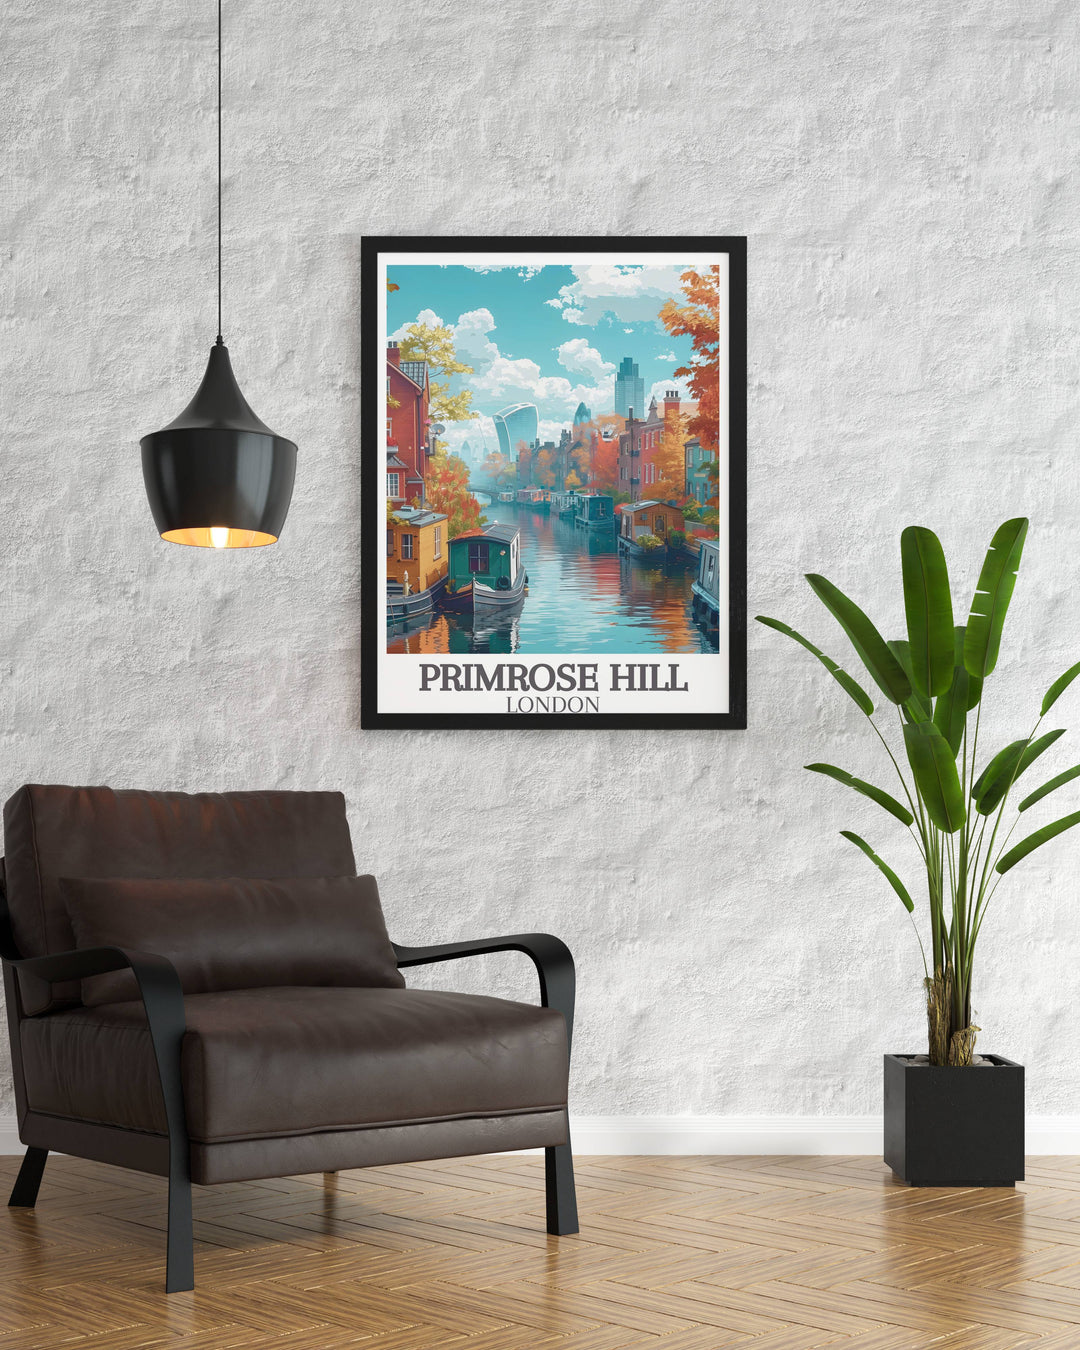 Stunning Primrose Hill Modern Wall Decor, showcasing the tranquil beauty of Londons skyline and lush parkland.